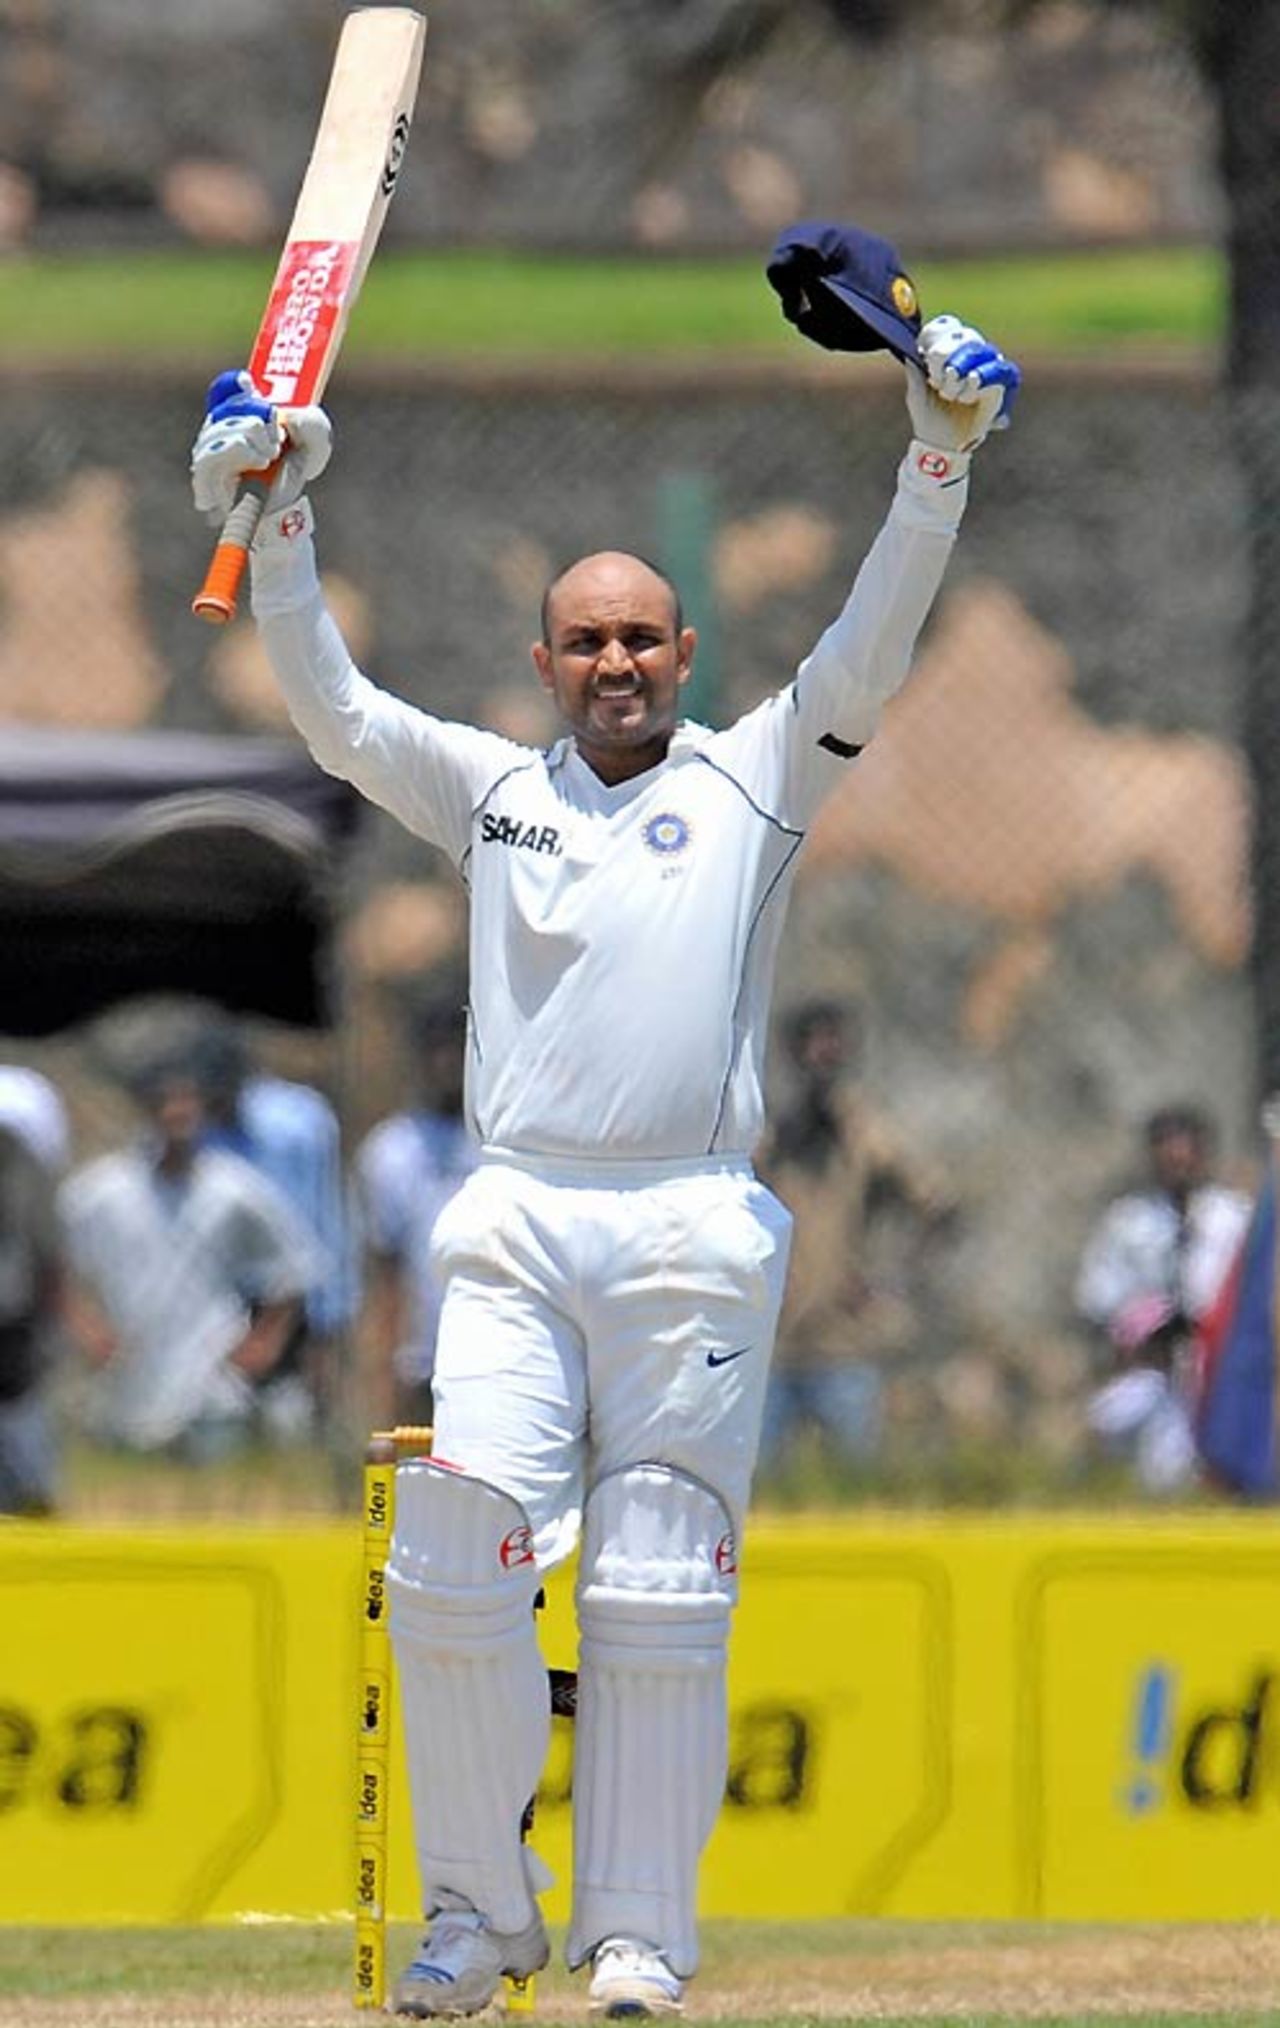 Virender Sehwag reaches his fifth Test double hundred, Sri Lanka v India, 2nd Test, Galle, 2nd day, August 1, 2008